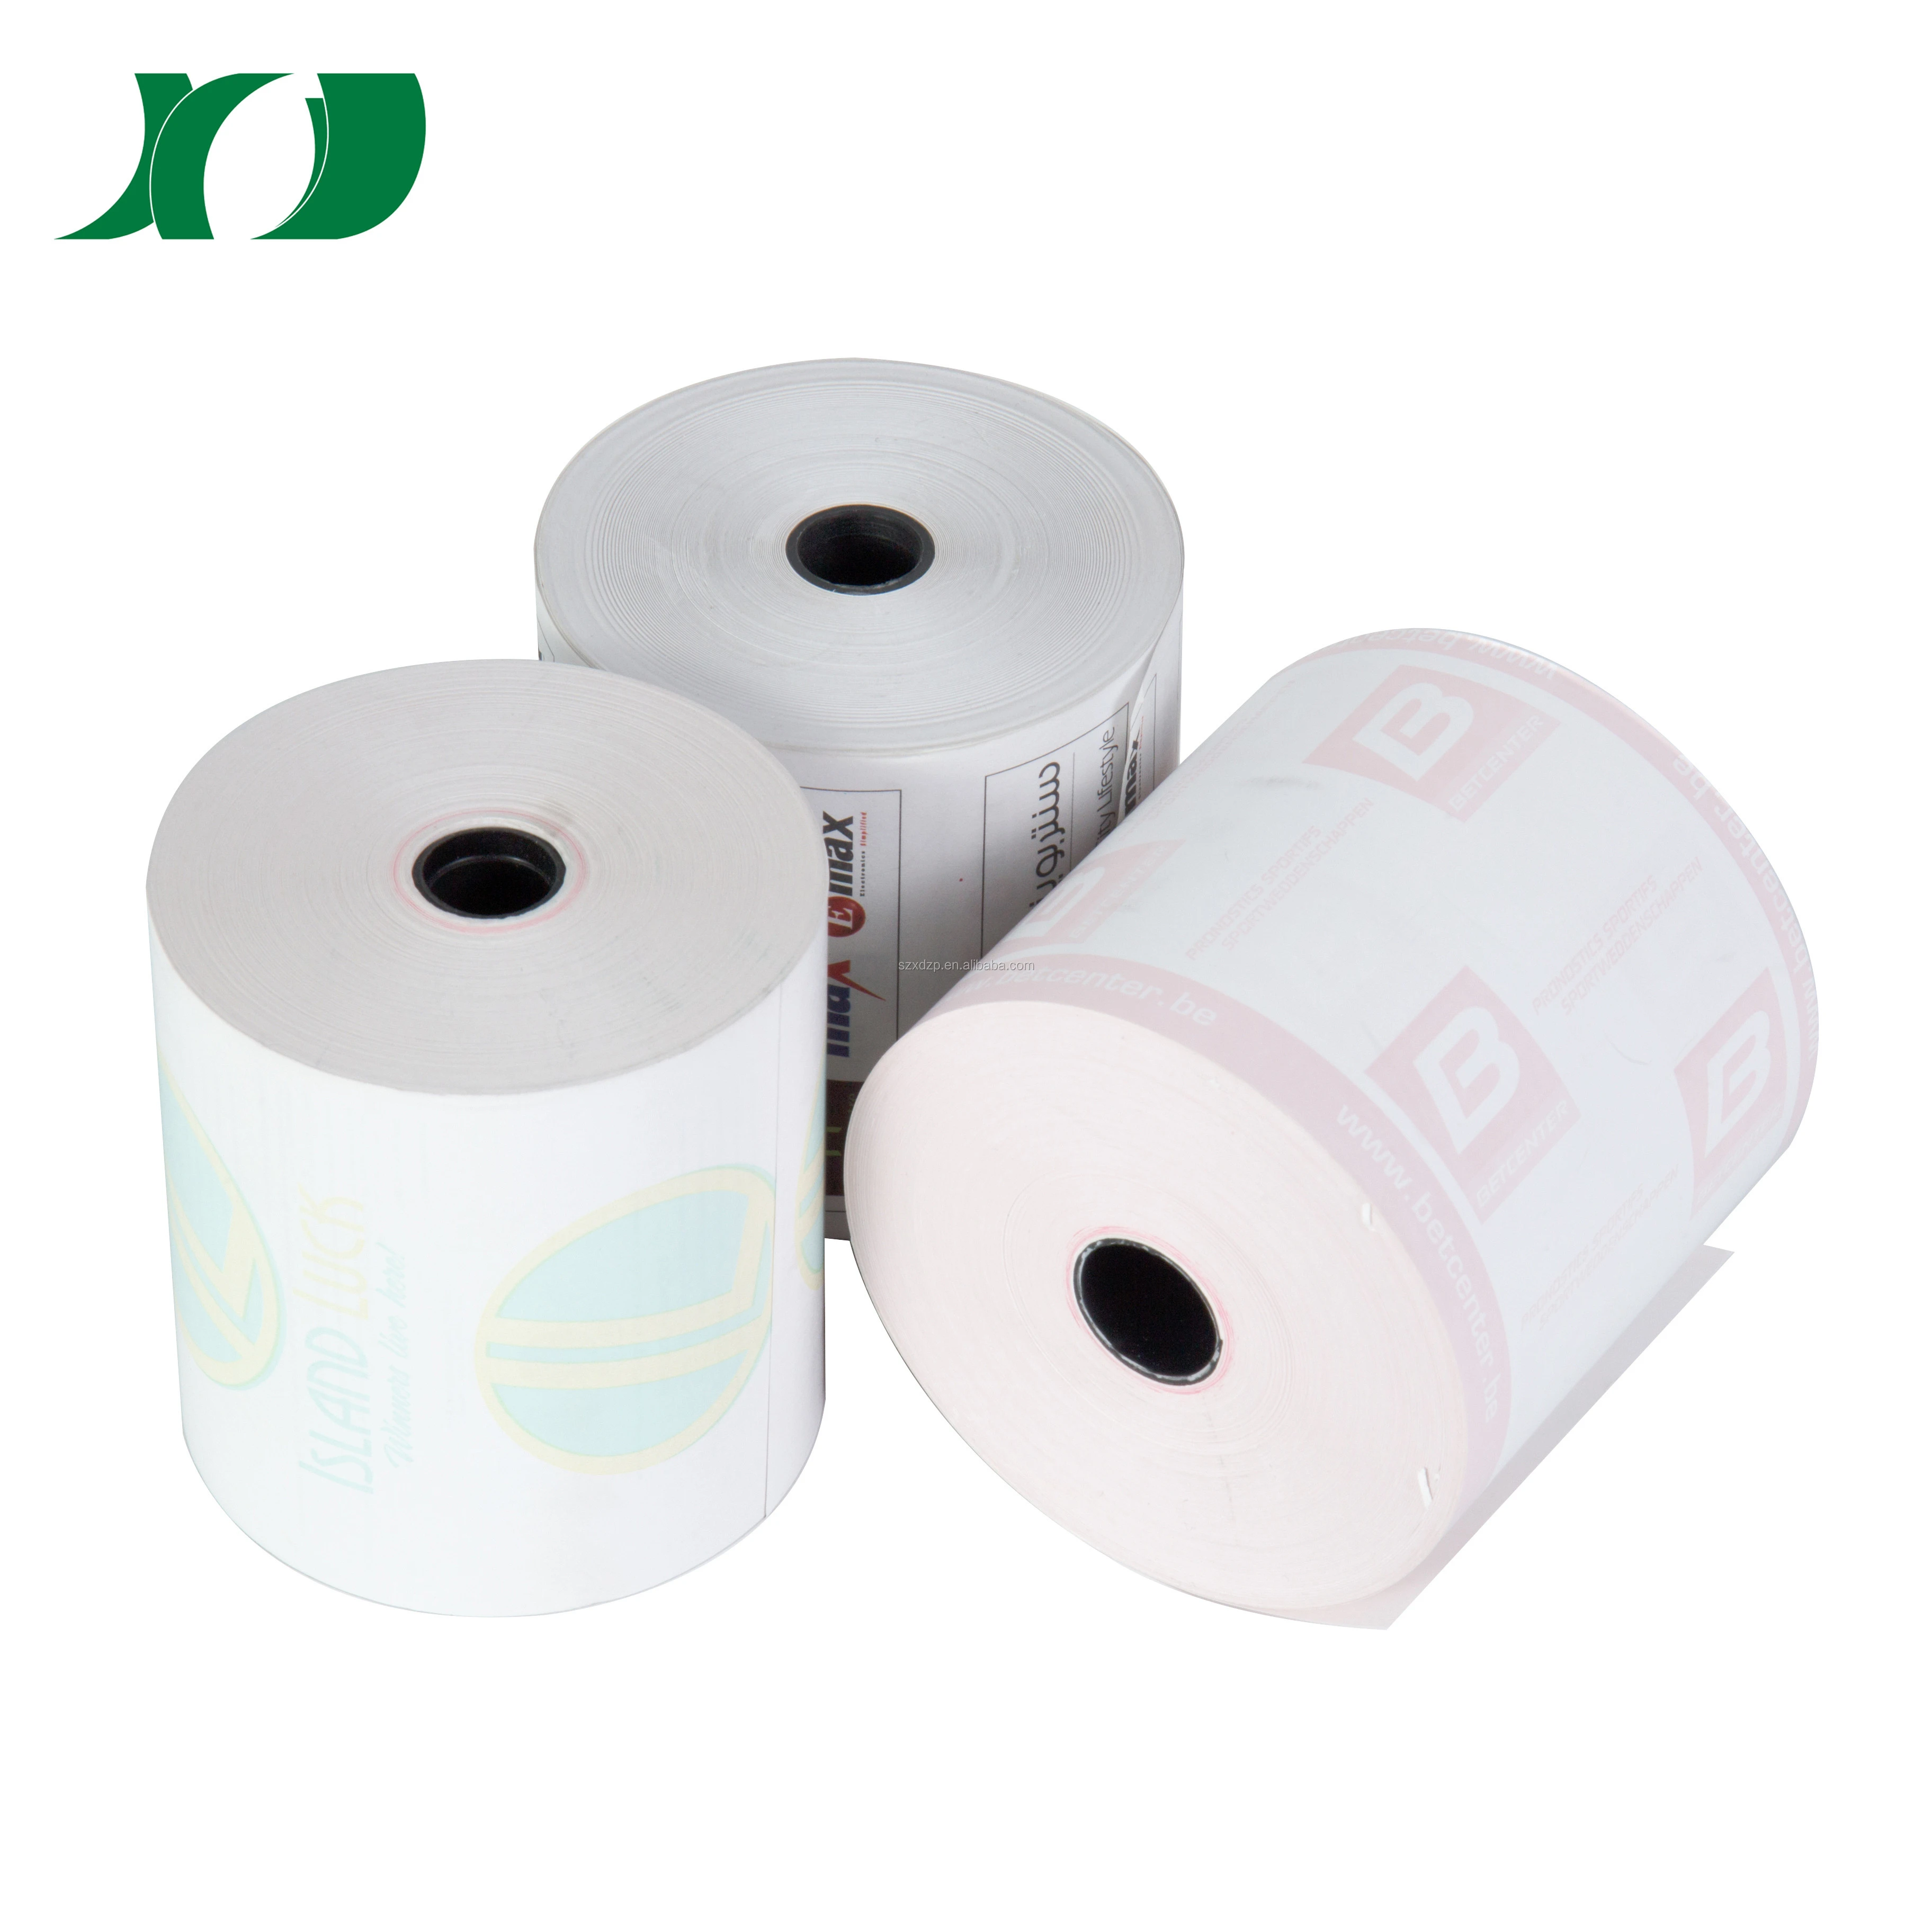 Most Popular 80mm x 80mm Cash Register Thermal Paper Roll for POS RECEIPT TERMINAL